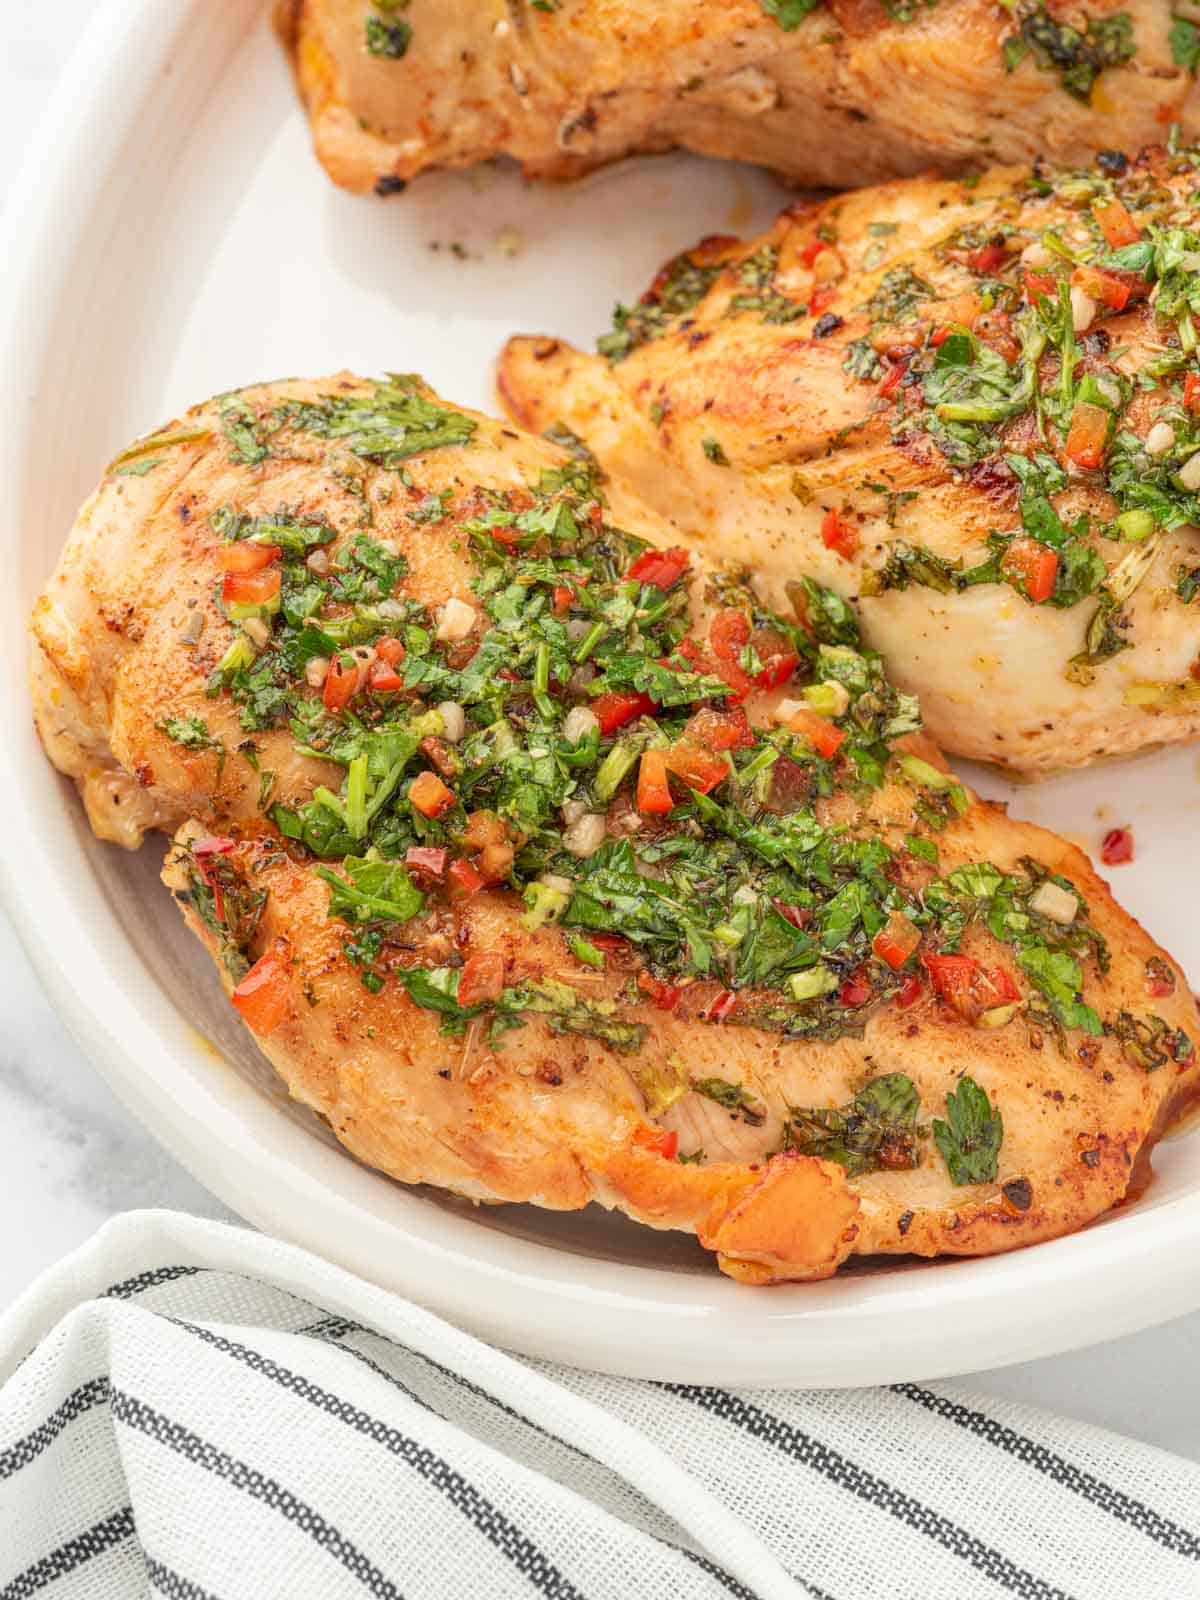 Closeup of chicken with chimichurri sauce.